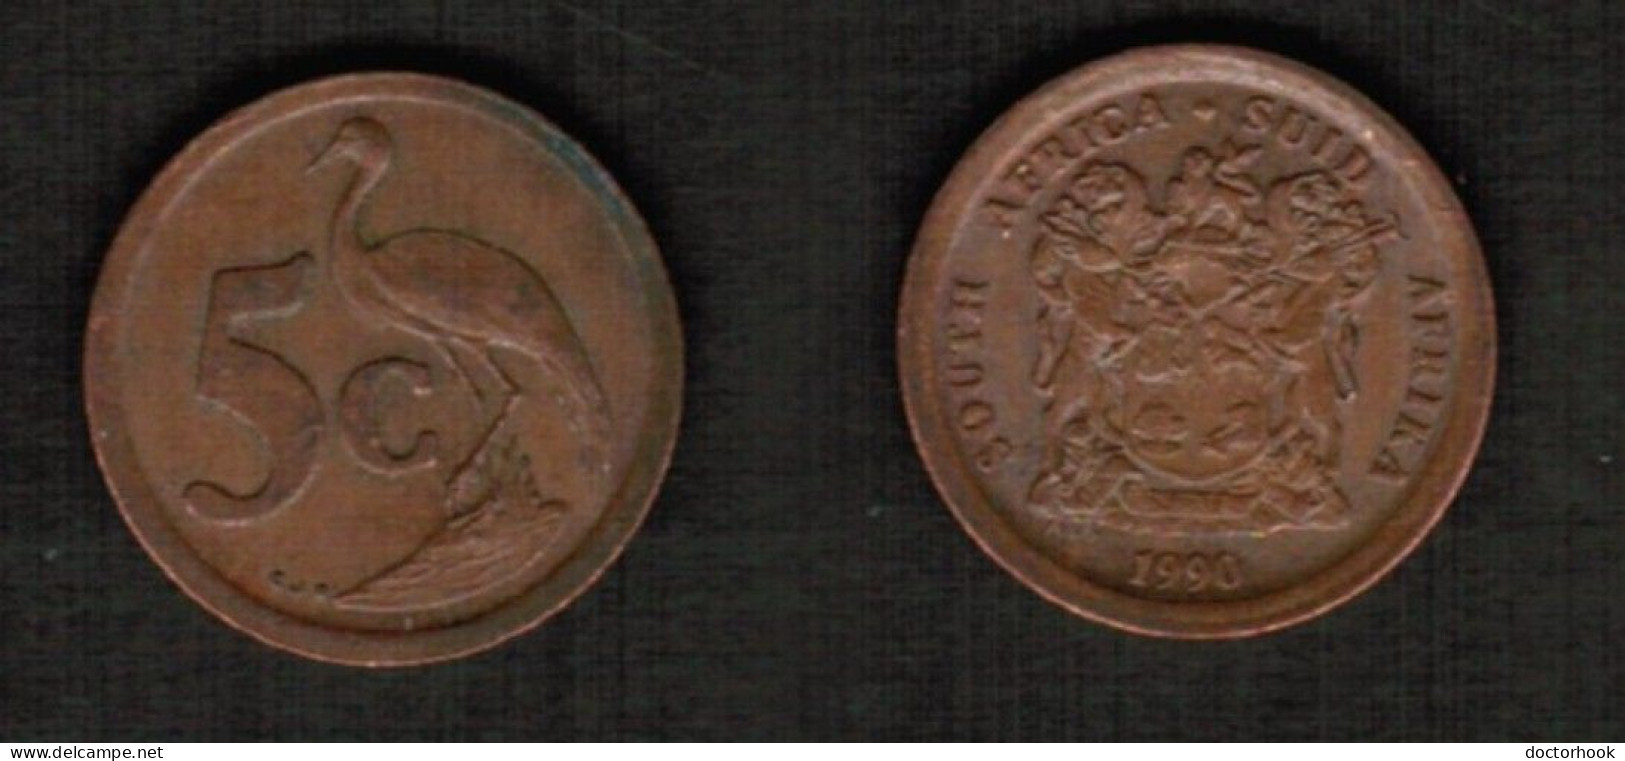 SOUTH AFRICA    5 CENTS 1990 (KM # 134) #7705 - South Africa